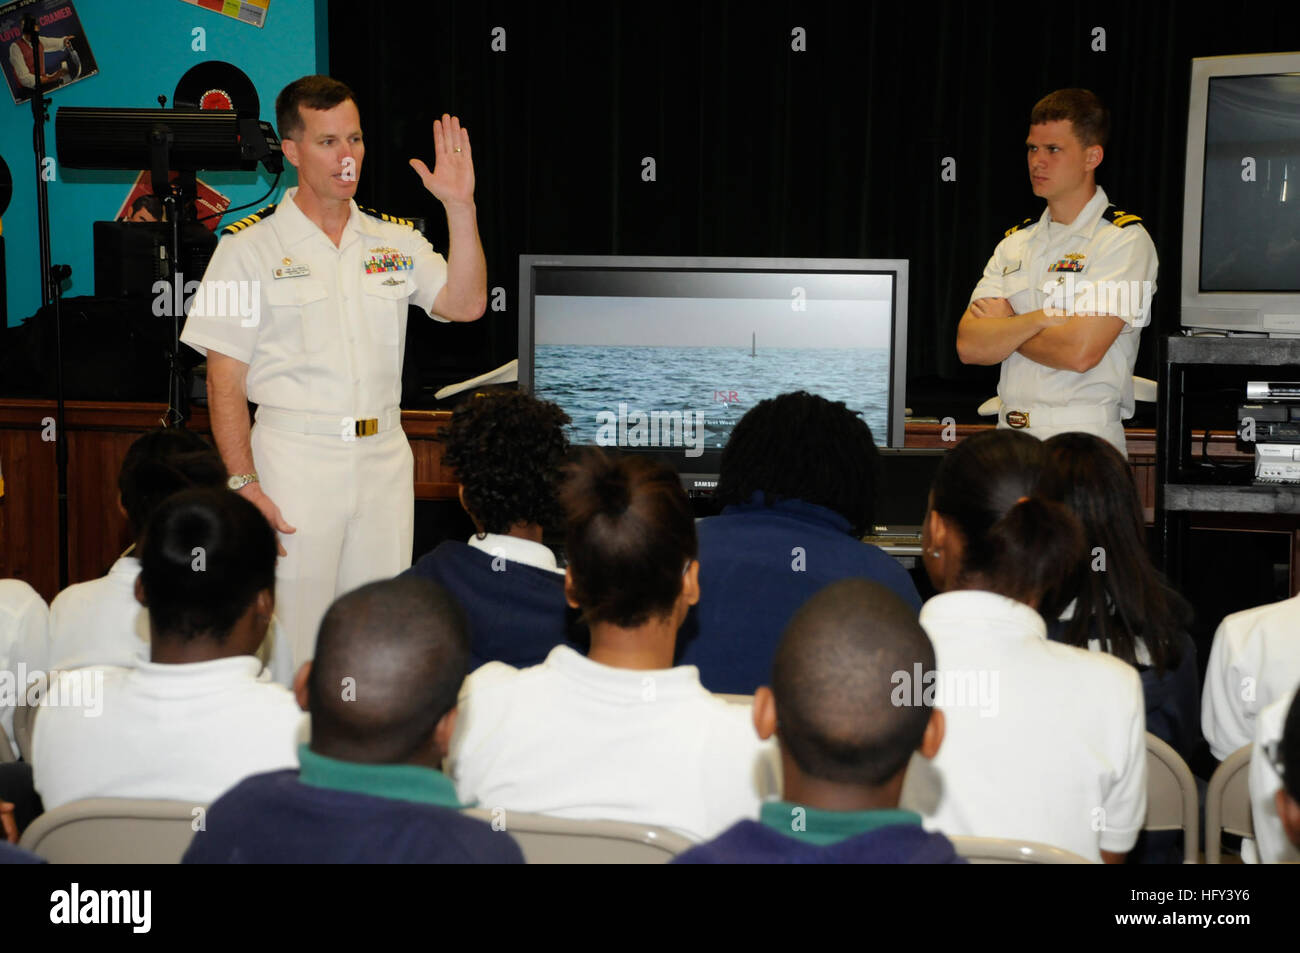 100316-N-5366K-011 TAMPA, Fla. (March 16, 2010) Capt. Thomas Calabrese, commanding officer of the Ohio-class guided-missile submarine USS Florida (SSGN 728), talks to 7th and 8th grade students about submarines at Academy Prep Center of Tampa during Tampa Bay Navy Week. Navy Weeks are designed to show Americans the investment they have made in their Navy and increase awareness in cities that do not have a significant Navy presence. (U.S. Navy photo by Mass Communication Specialist 2nd Class Michelle Kapica/Released) US Navy 100316-N-5366K-011 Capt. Thomas Calabrese talks to 7th and 8th grade s Stock Photo